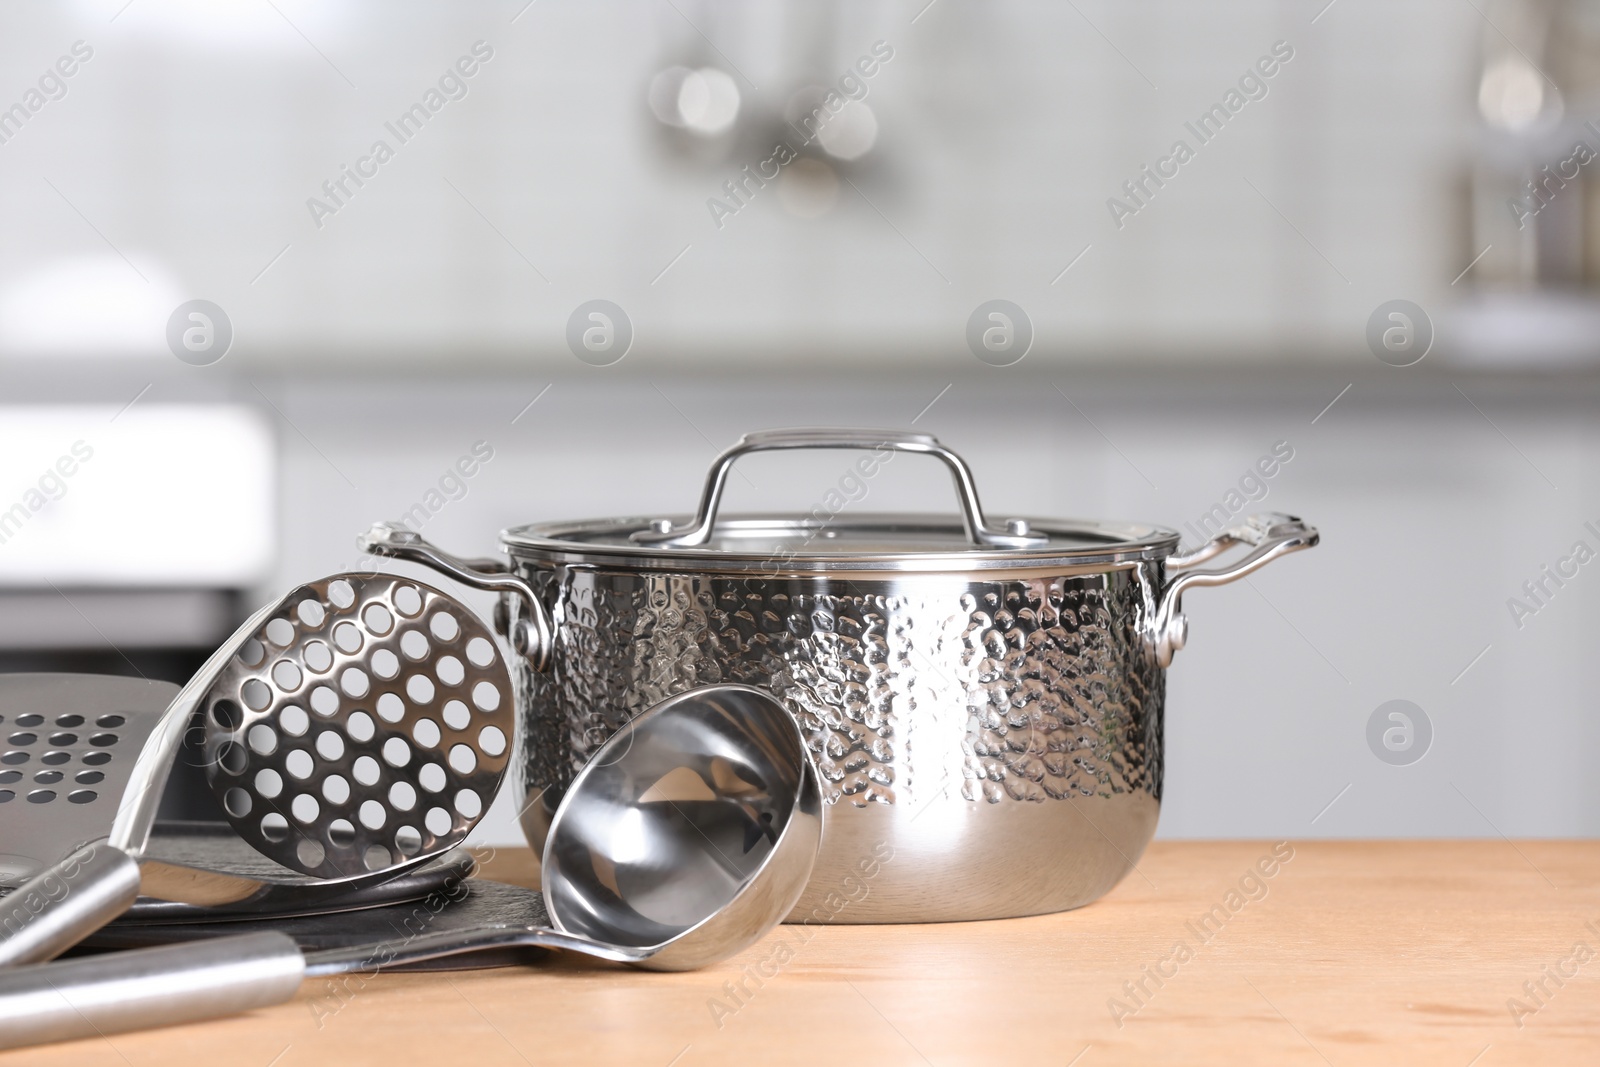 Photo of Set of clean cookware and utensils on table in kitchen